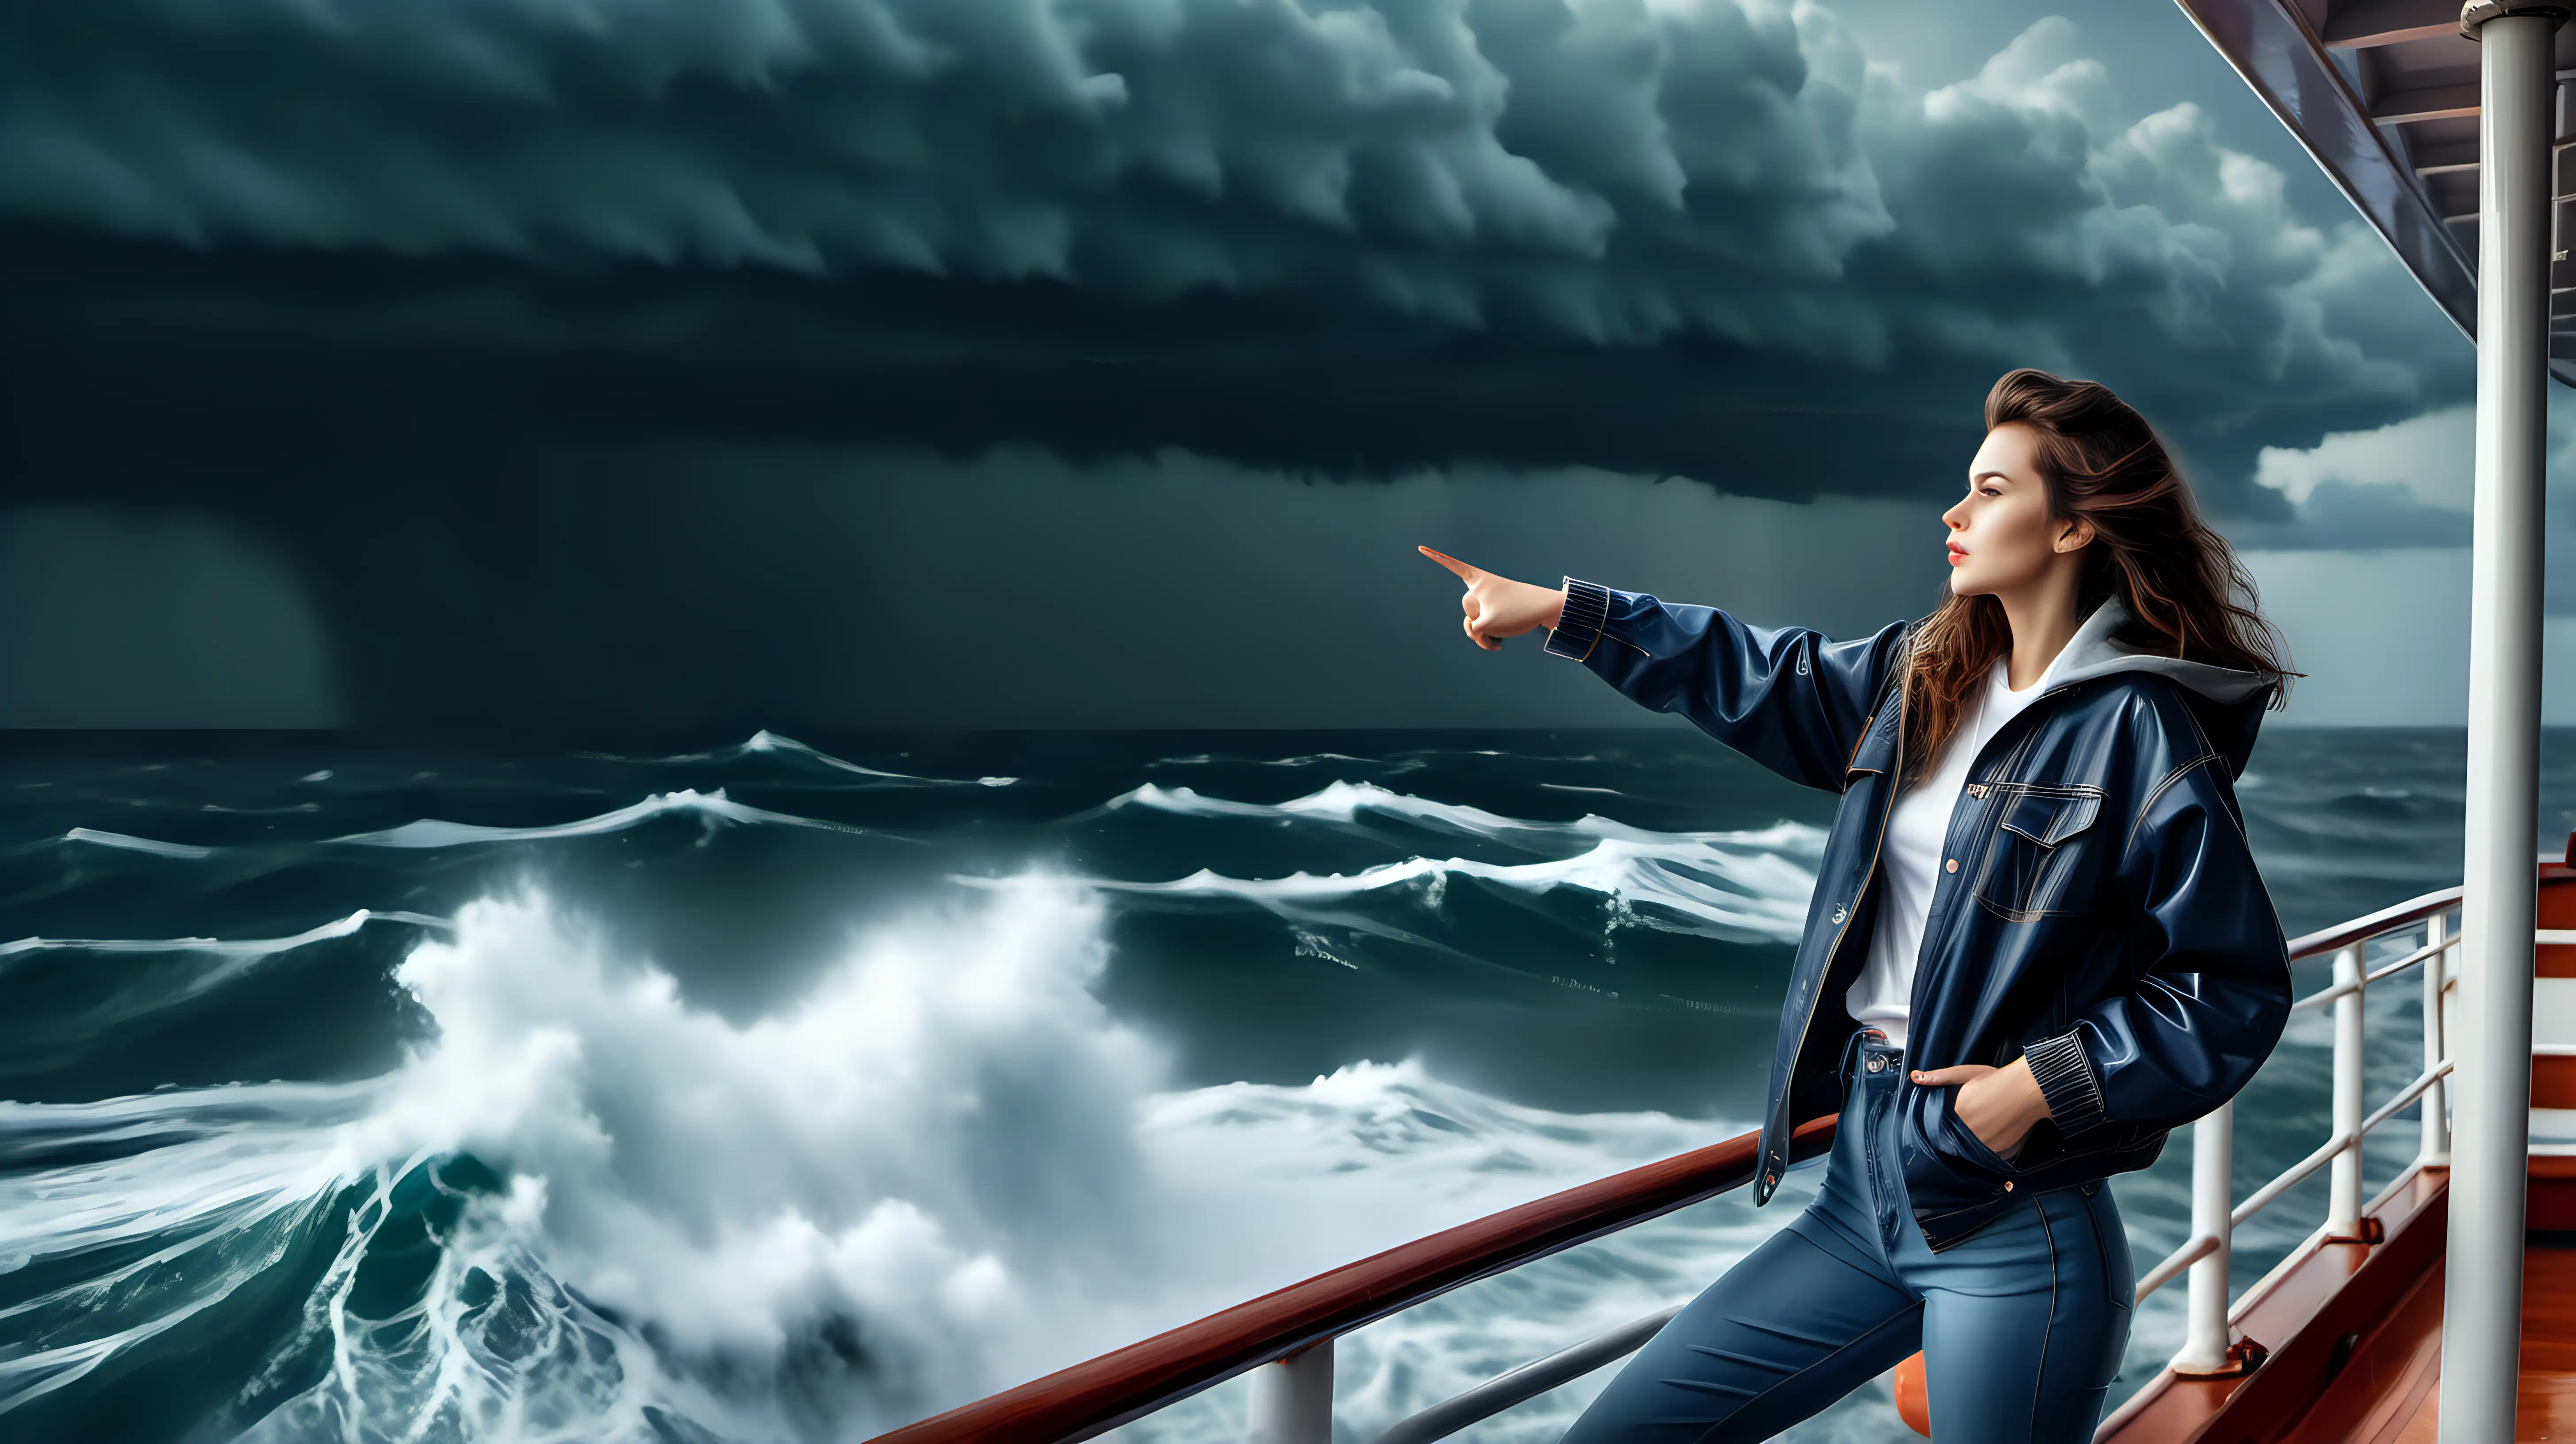 real_photo_beauty_girl jacket jeans pants alone watching from ship pointing side sea in storm horizon ship rain wind big waves
